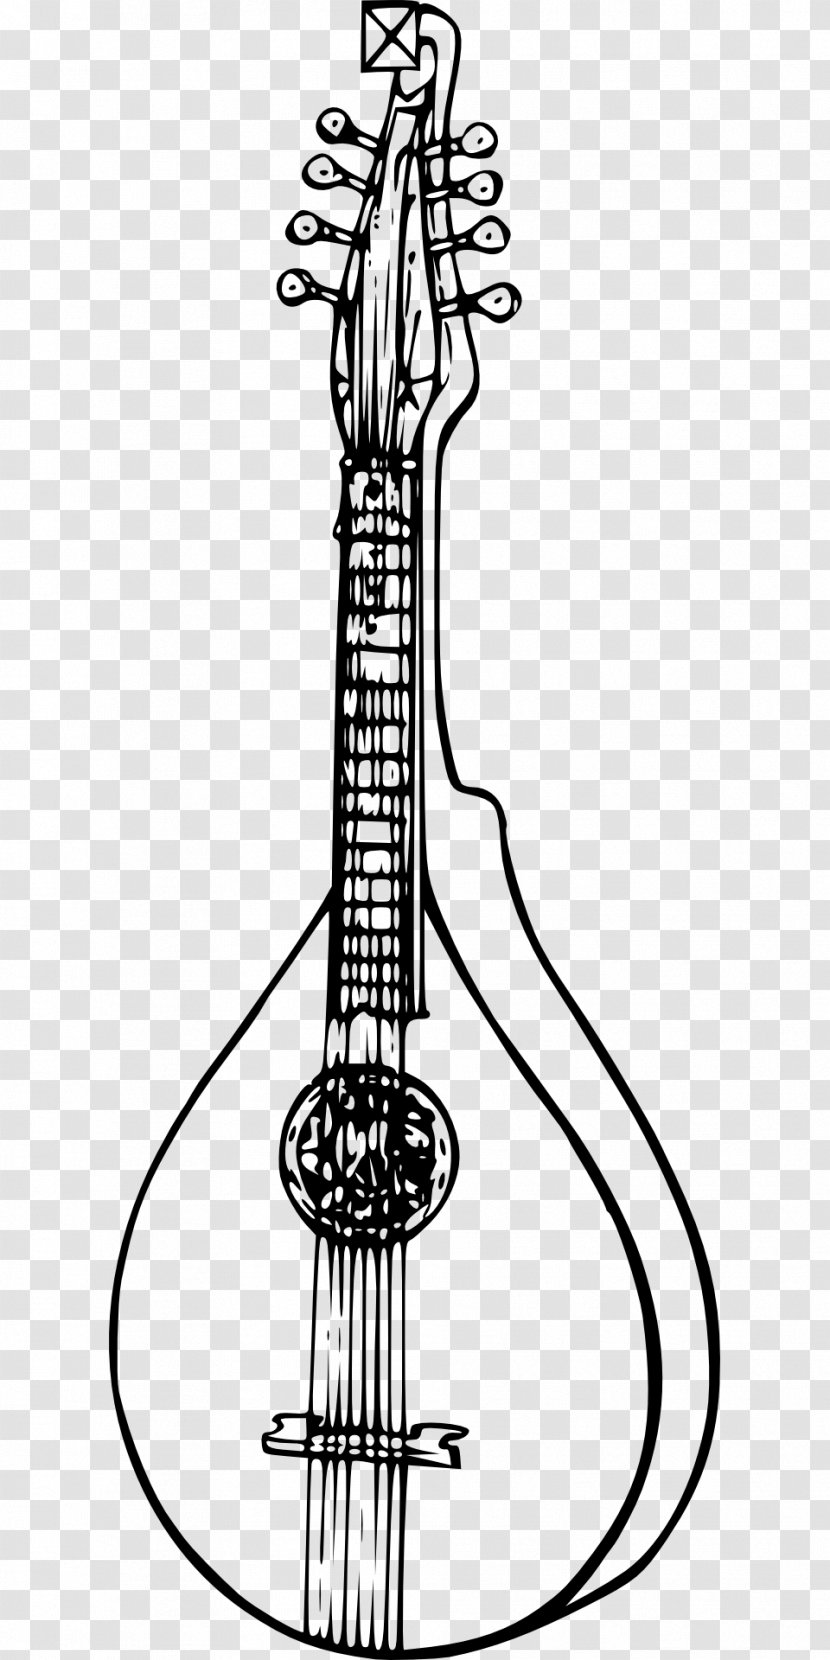 Plucked String Instrument Black And White Mandolin Musical Instruments - Cartoon Transparent PNG